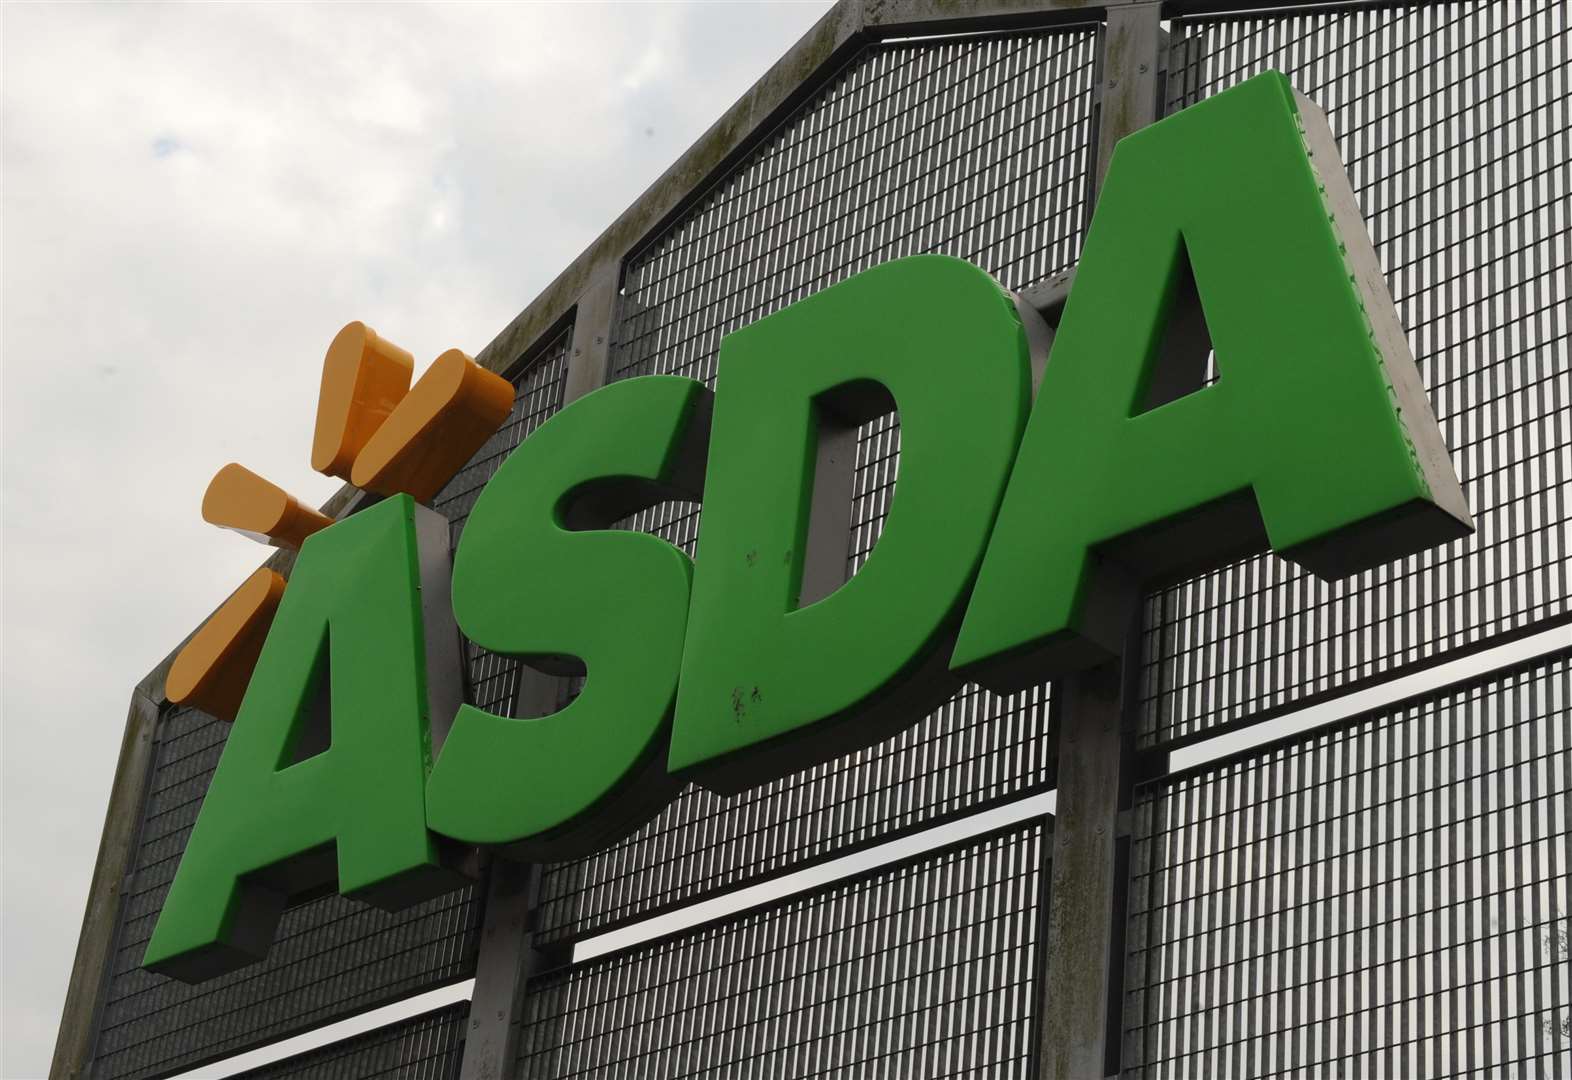 Shoppers baffled after key fobs stop working in Asda car park, Gravesend